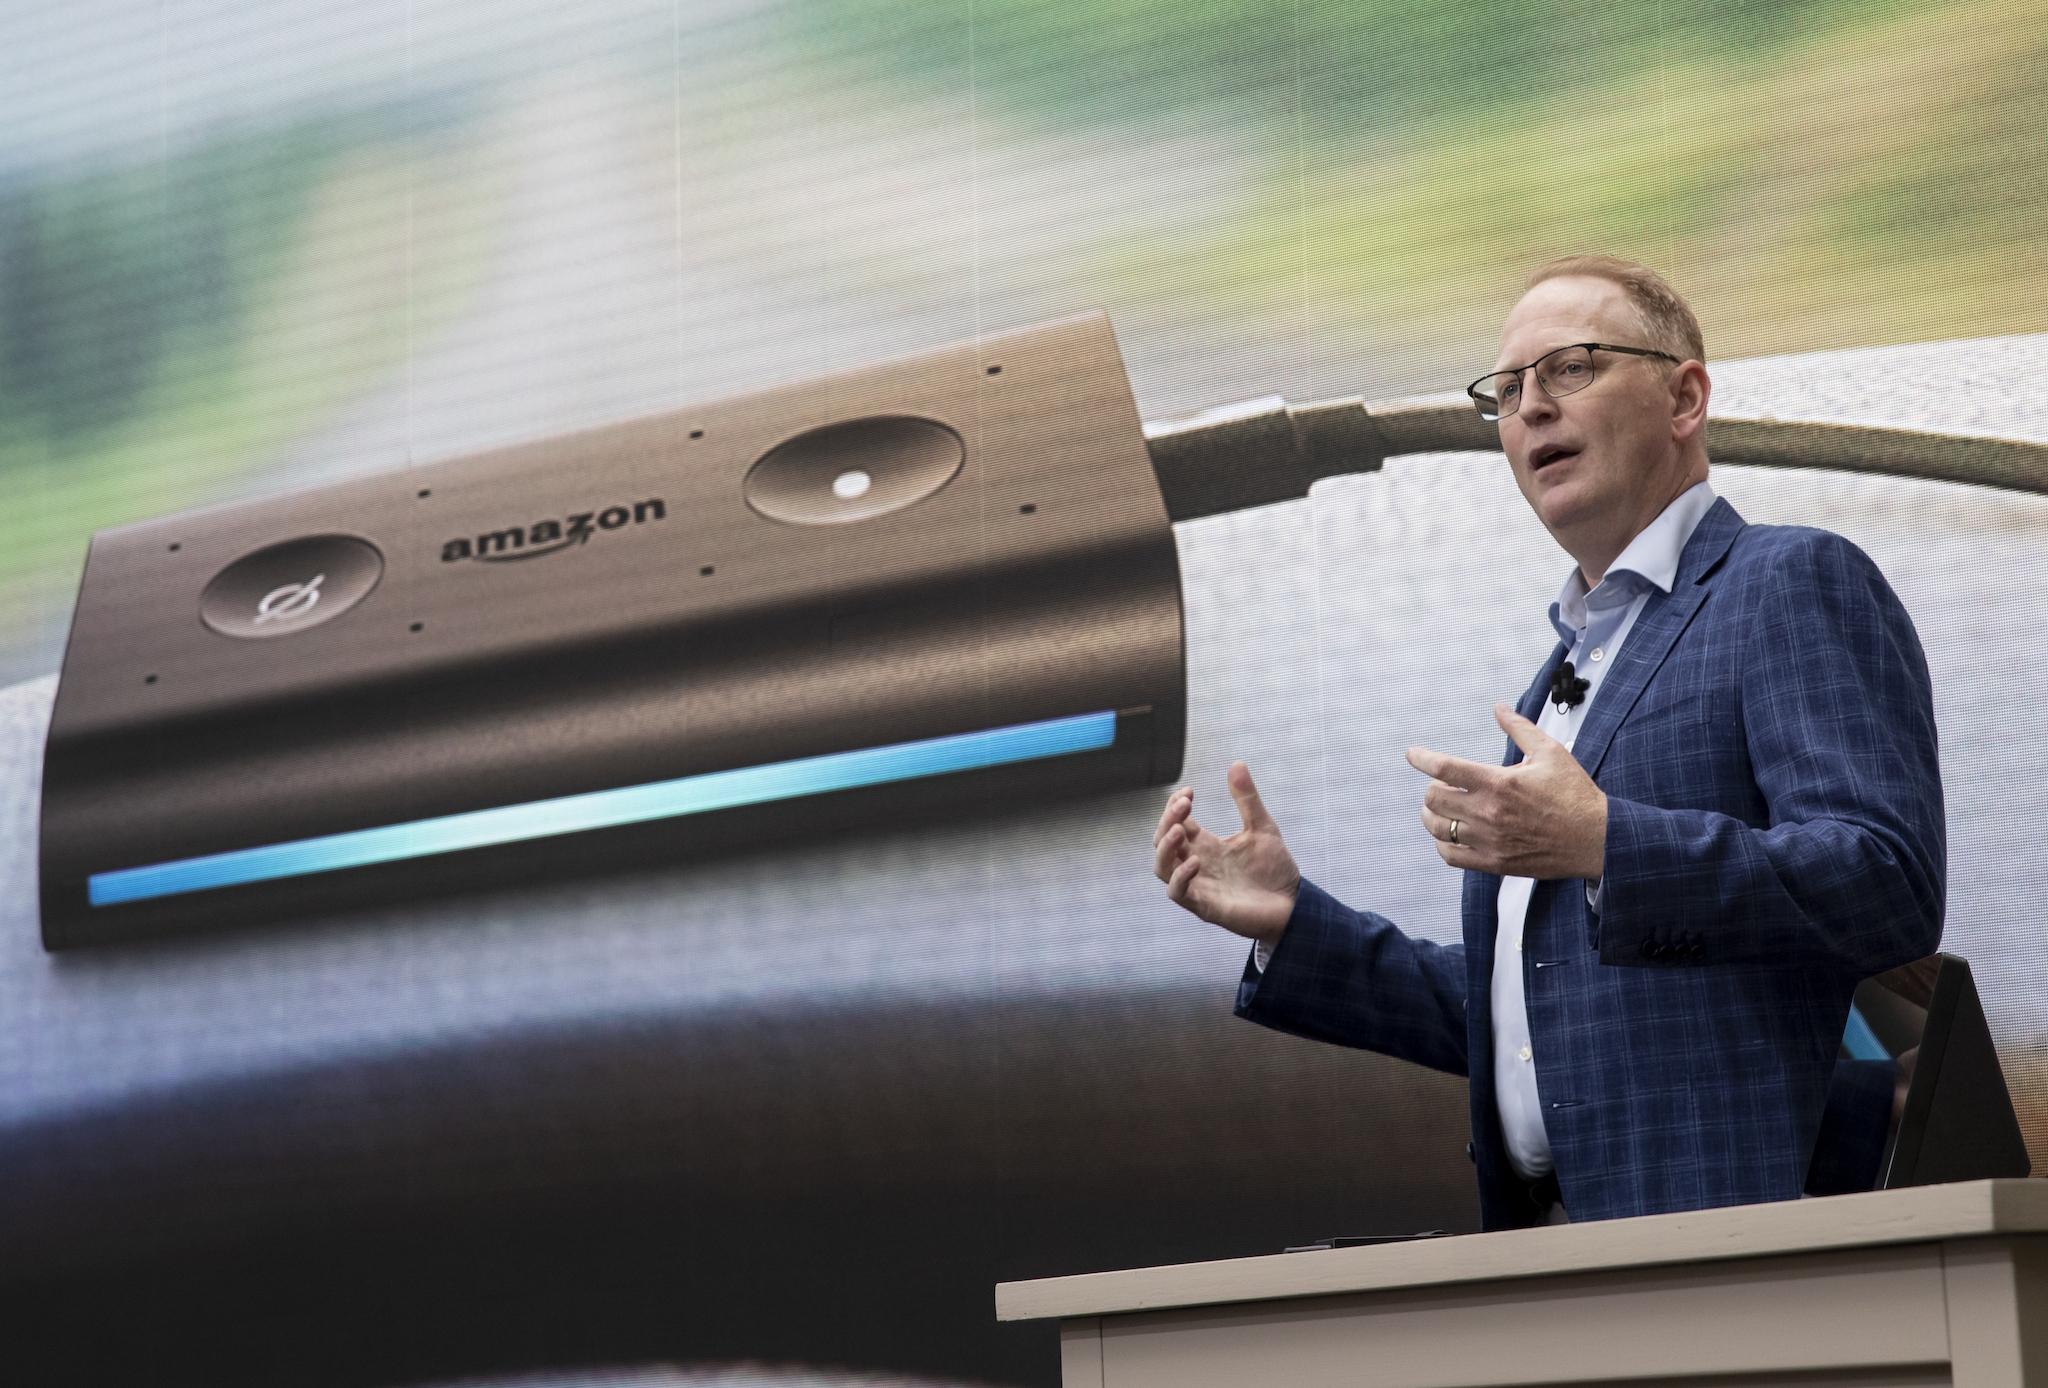 Dave Limp, Senior Vice President of Amazon Devices, introduces the "Echo Auto,' which allows users to use Alexa in their car, during an event at the Amazon Spheres, on September 20, 2018 in Seattle Washington